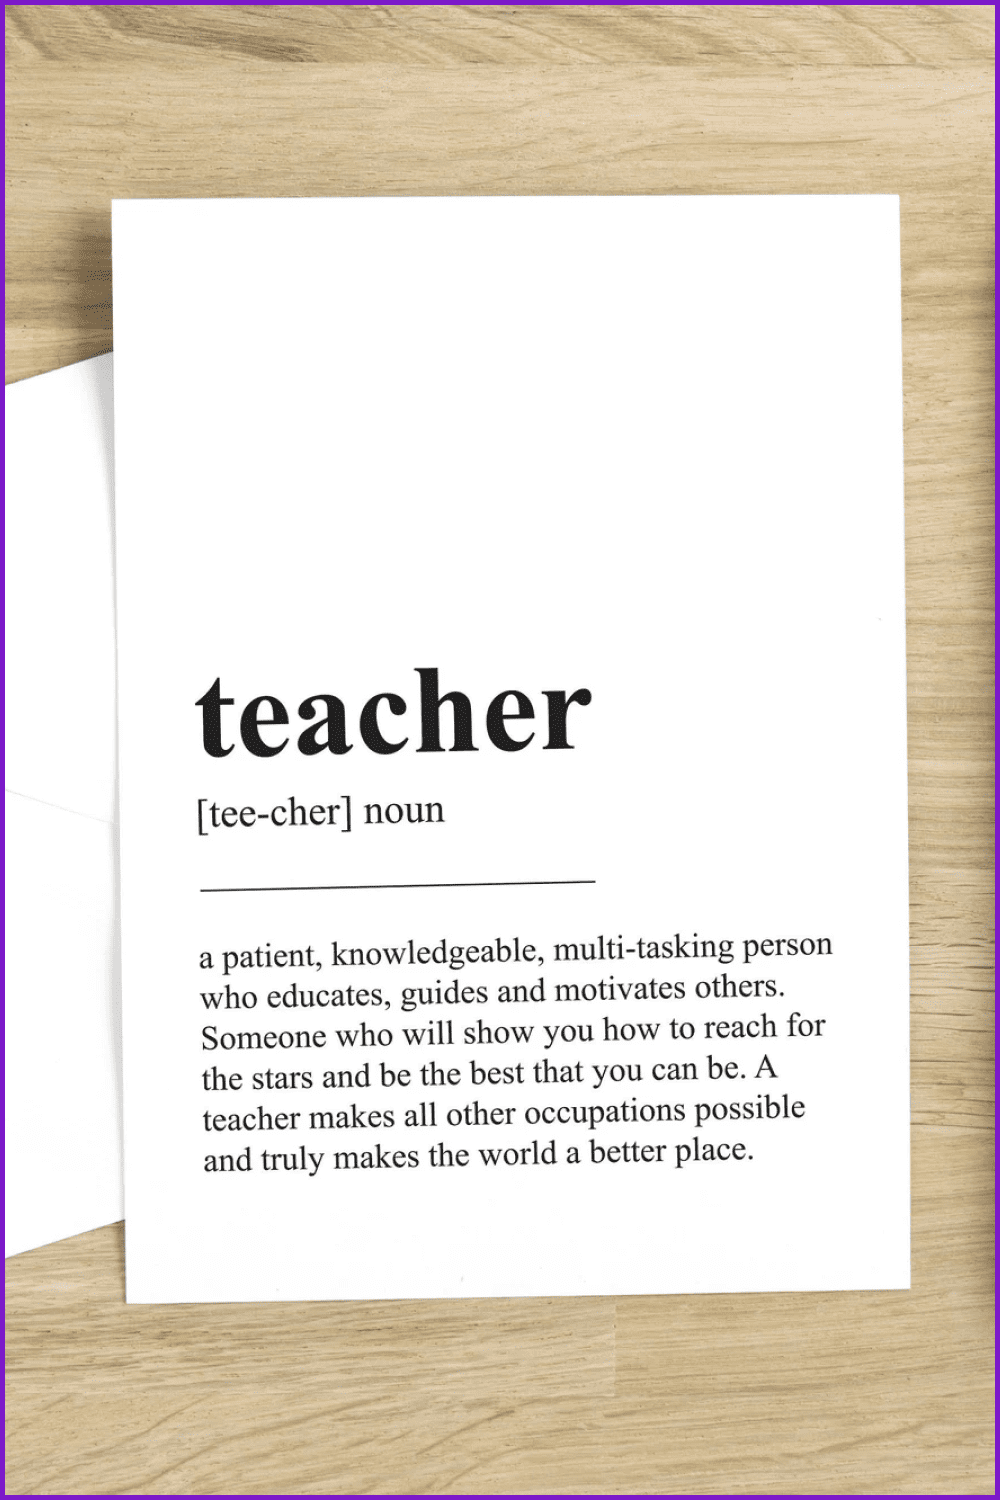 Postcard with text from wikipedia about the teacher on a white background.